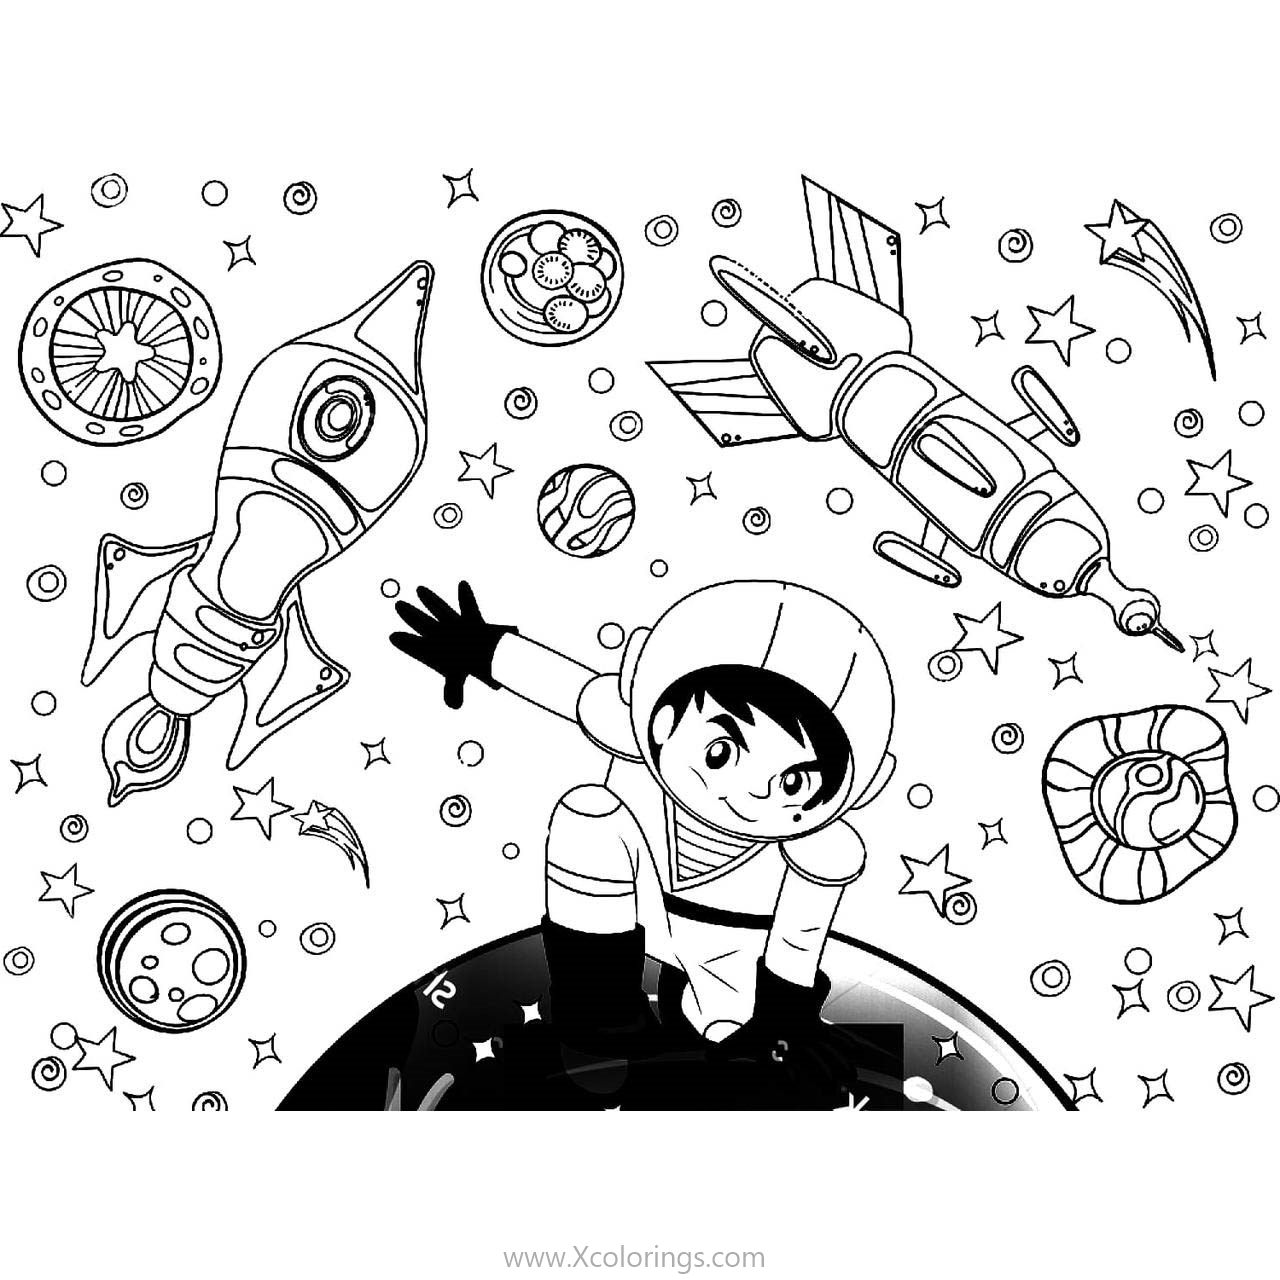 Free Astronaut Boy Coloring Pages printable